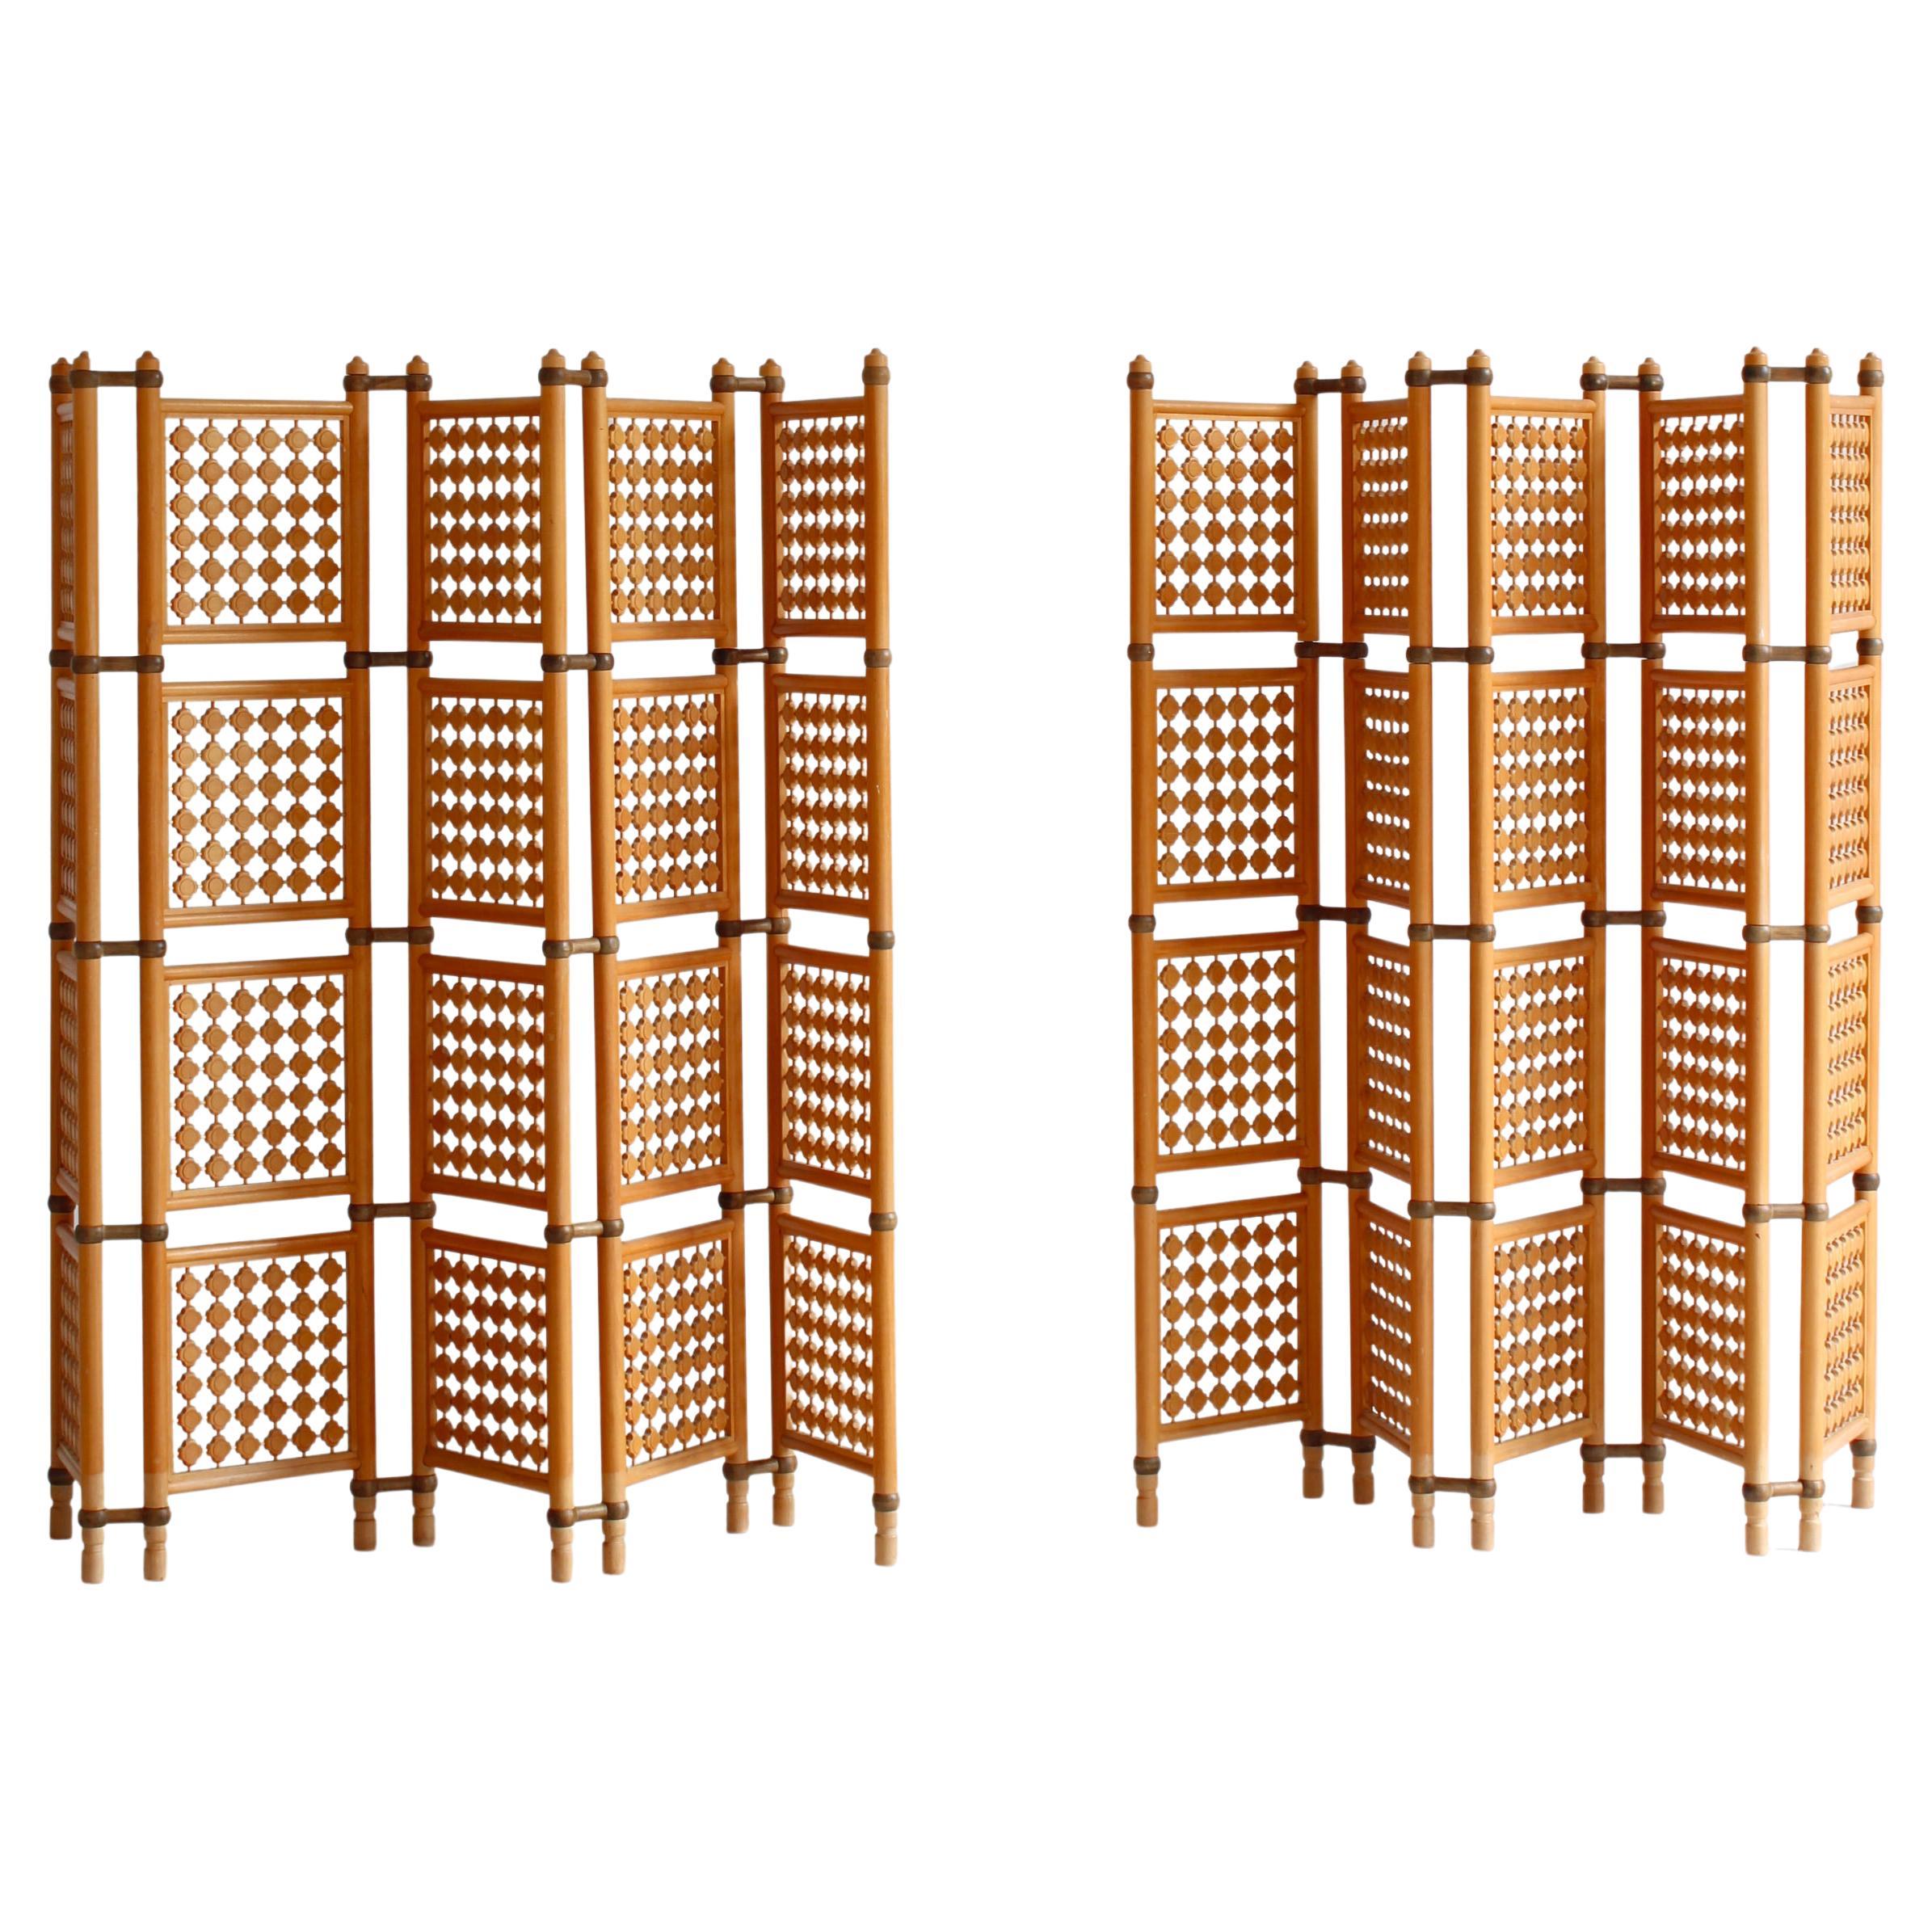 Set of Scandinavian Modern Screens or Room Dividers in Stained Beechwood, 1940s For Sale